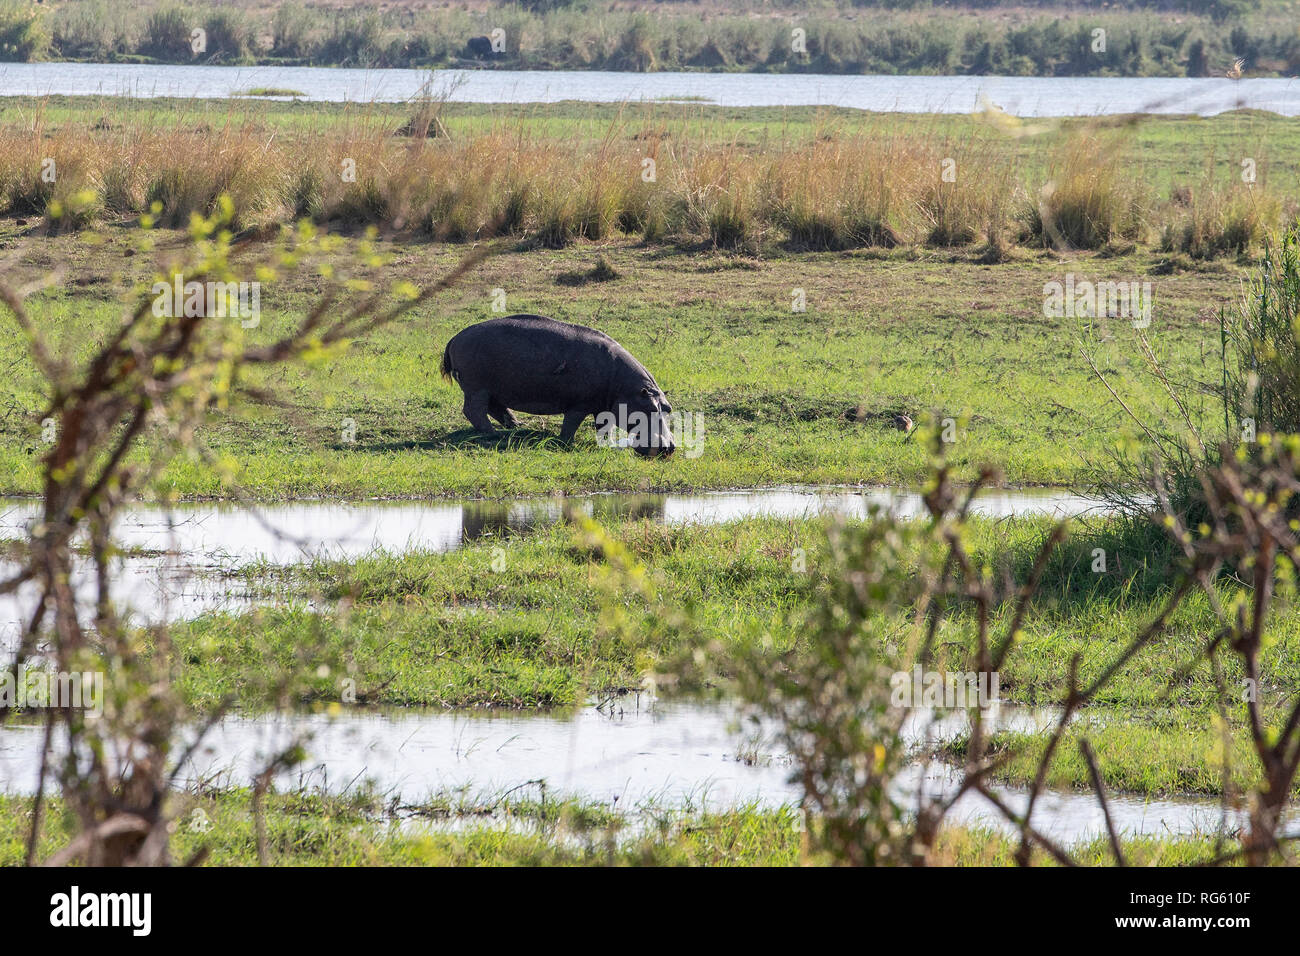 Hippo out of the water, munching grass on the Kavango floodplaiin in Bwabwata National Park. Stock Photo